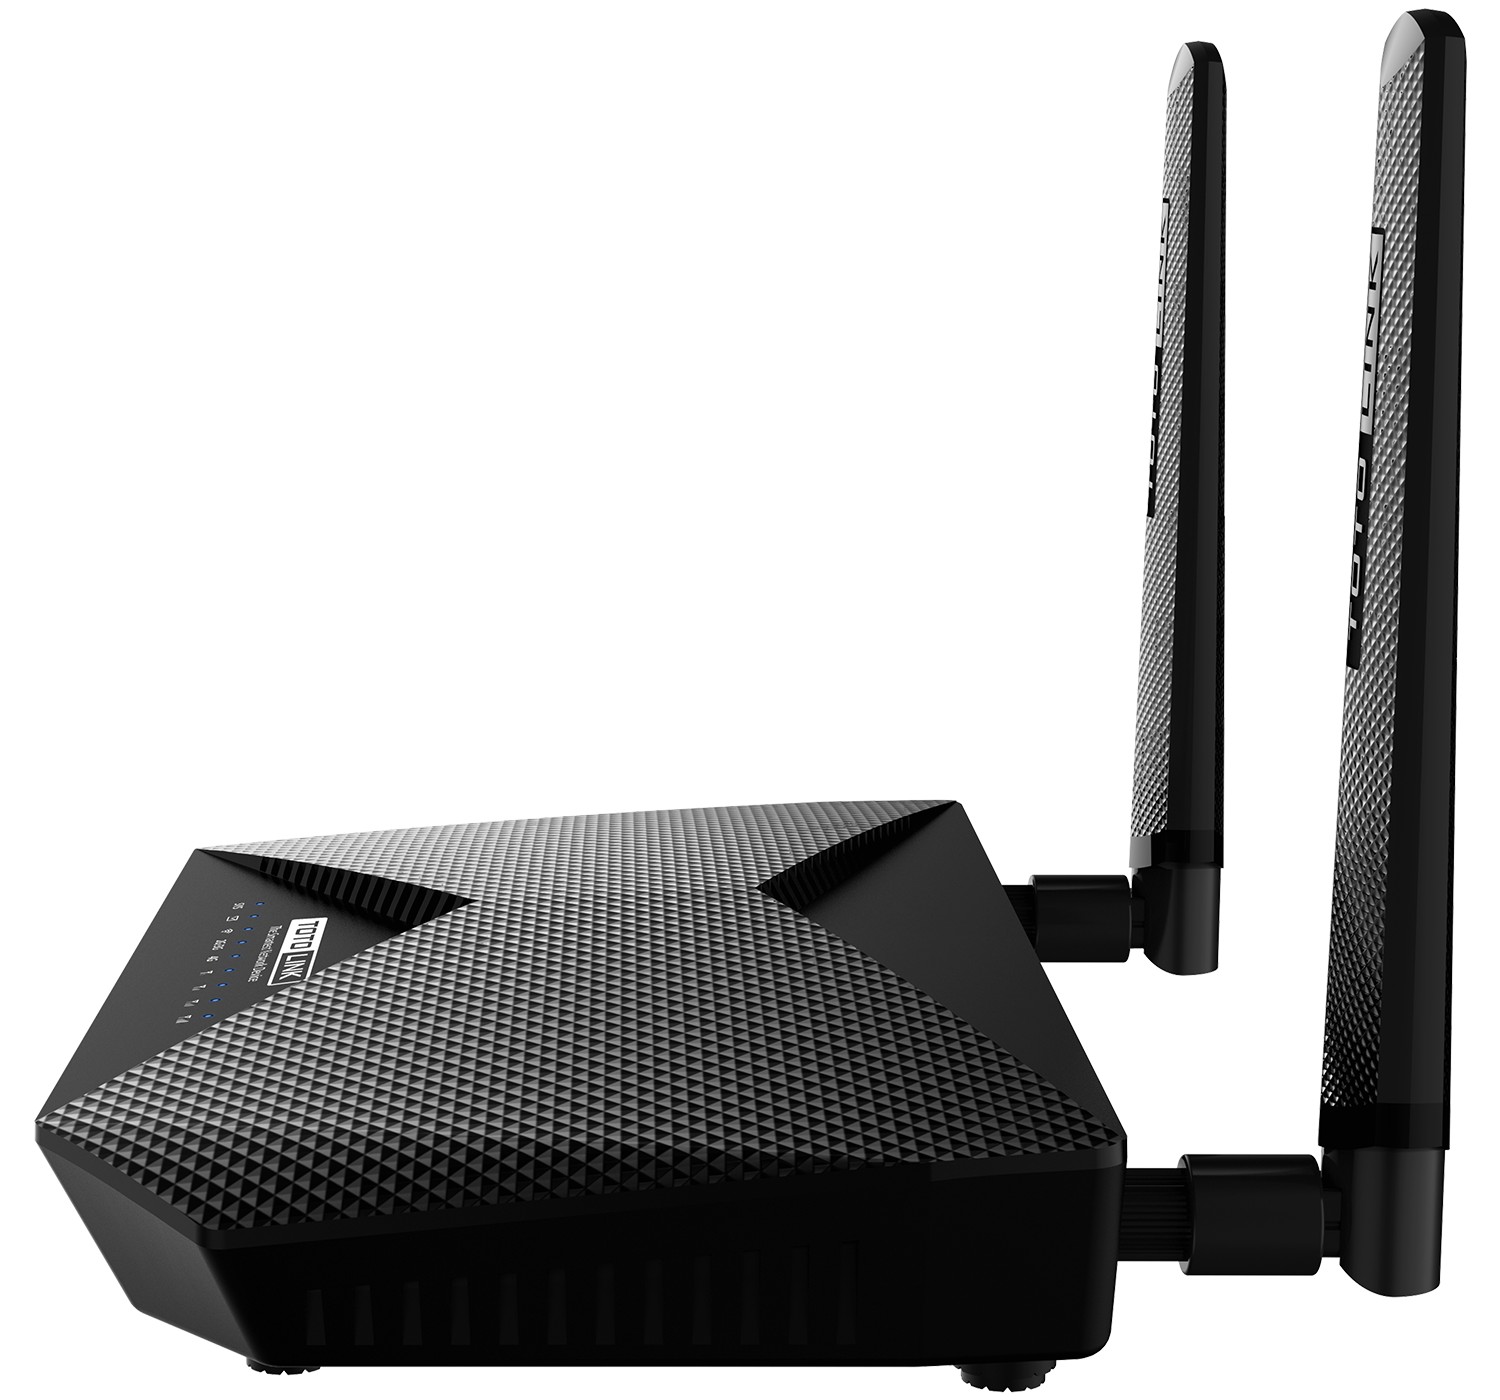 TOTOLINK LR1200 AC1200 DUAL BAND WIFI Router with SIM slot